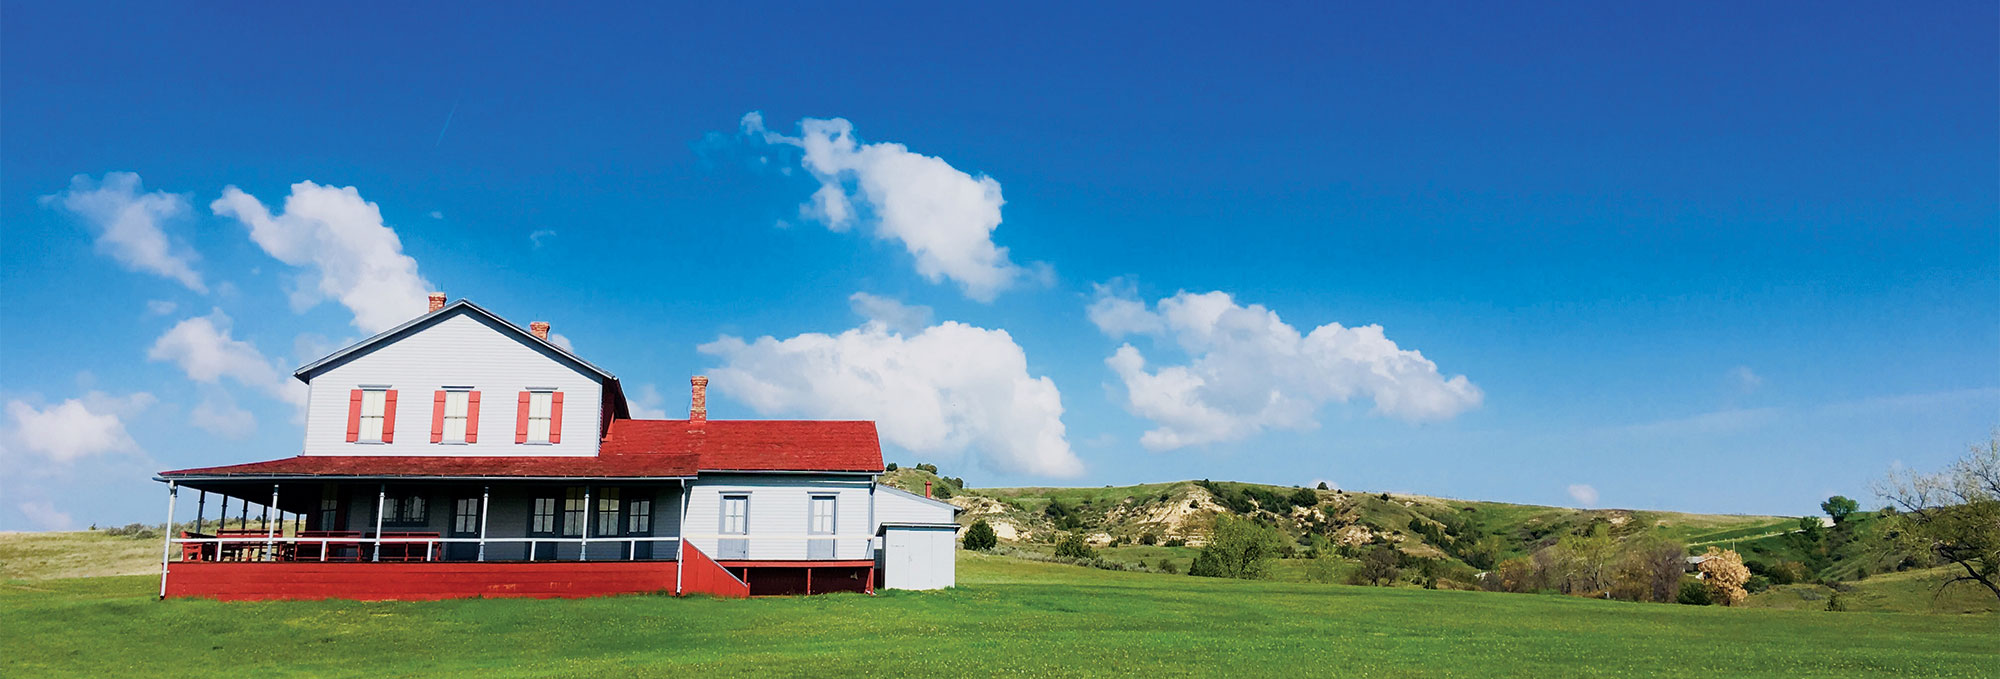 light gray house with a red porch and roof sits on green grass with a blue sky and buttes in the background